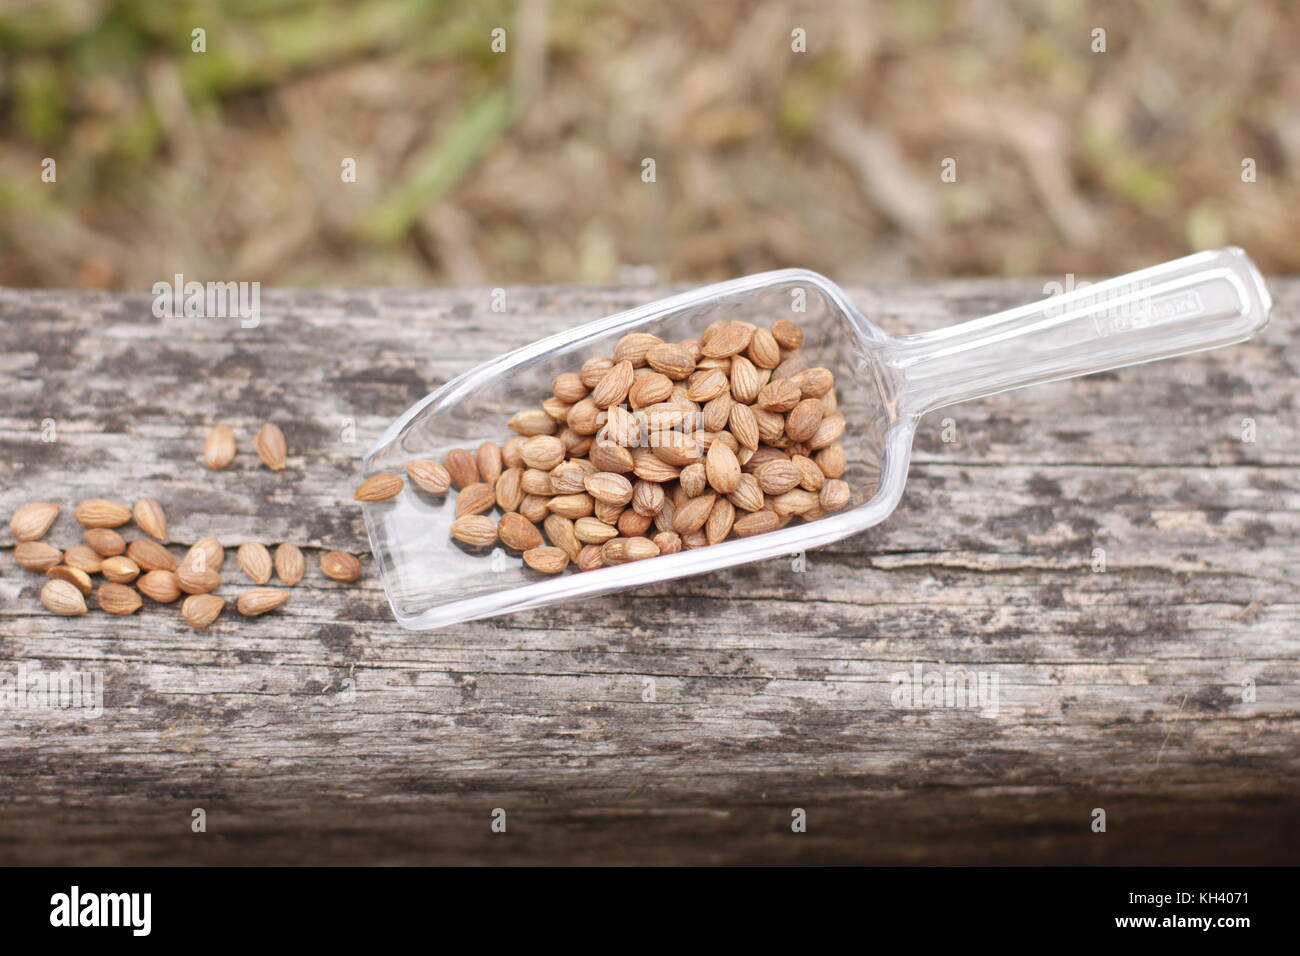 Mahlab seed kernels in transparent spoon over wood trunk with green grass on the background Stock Photo